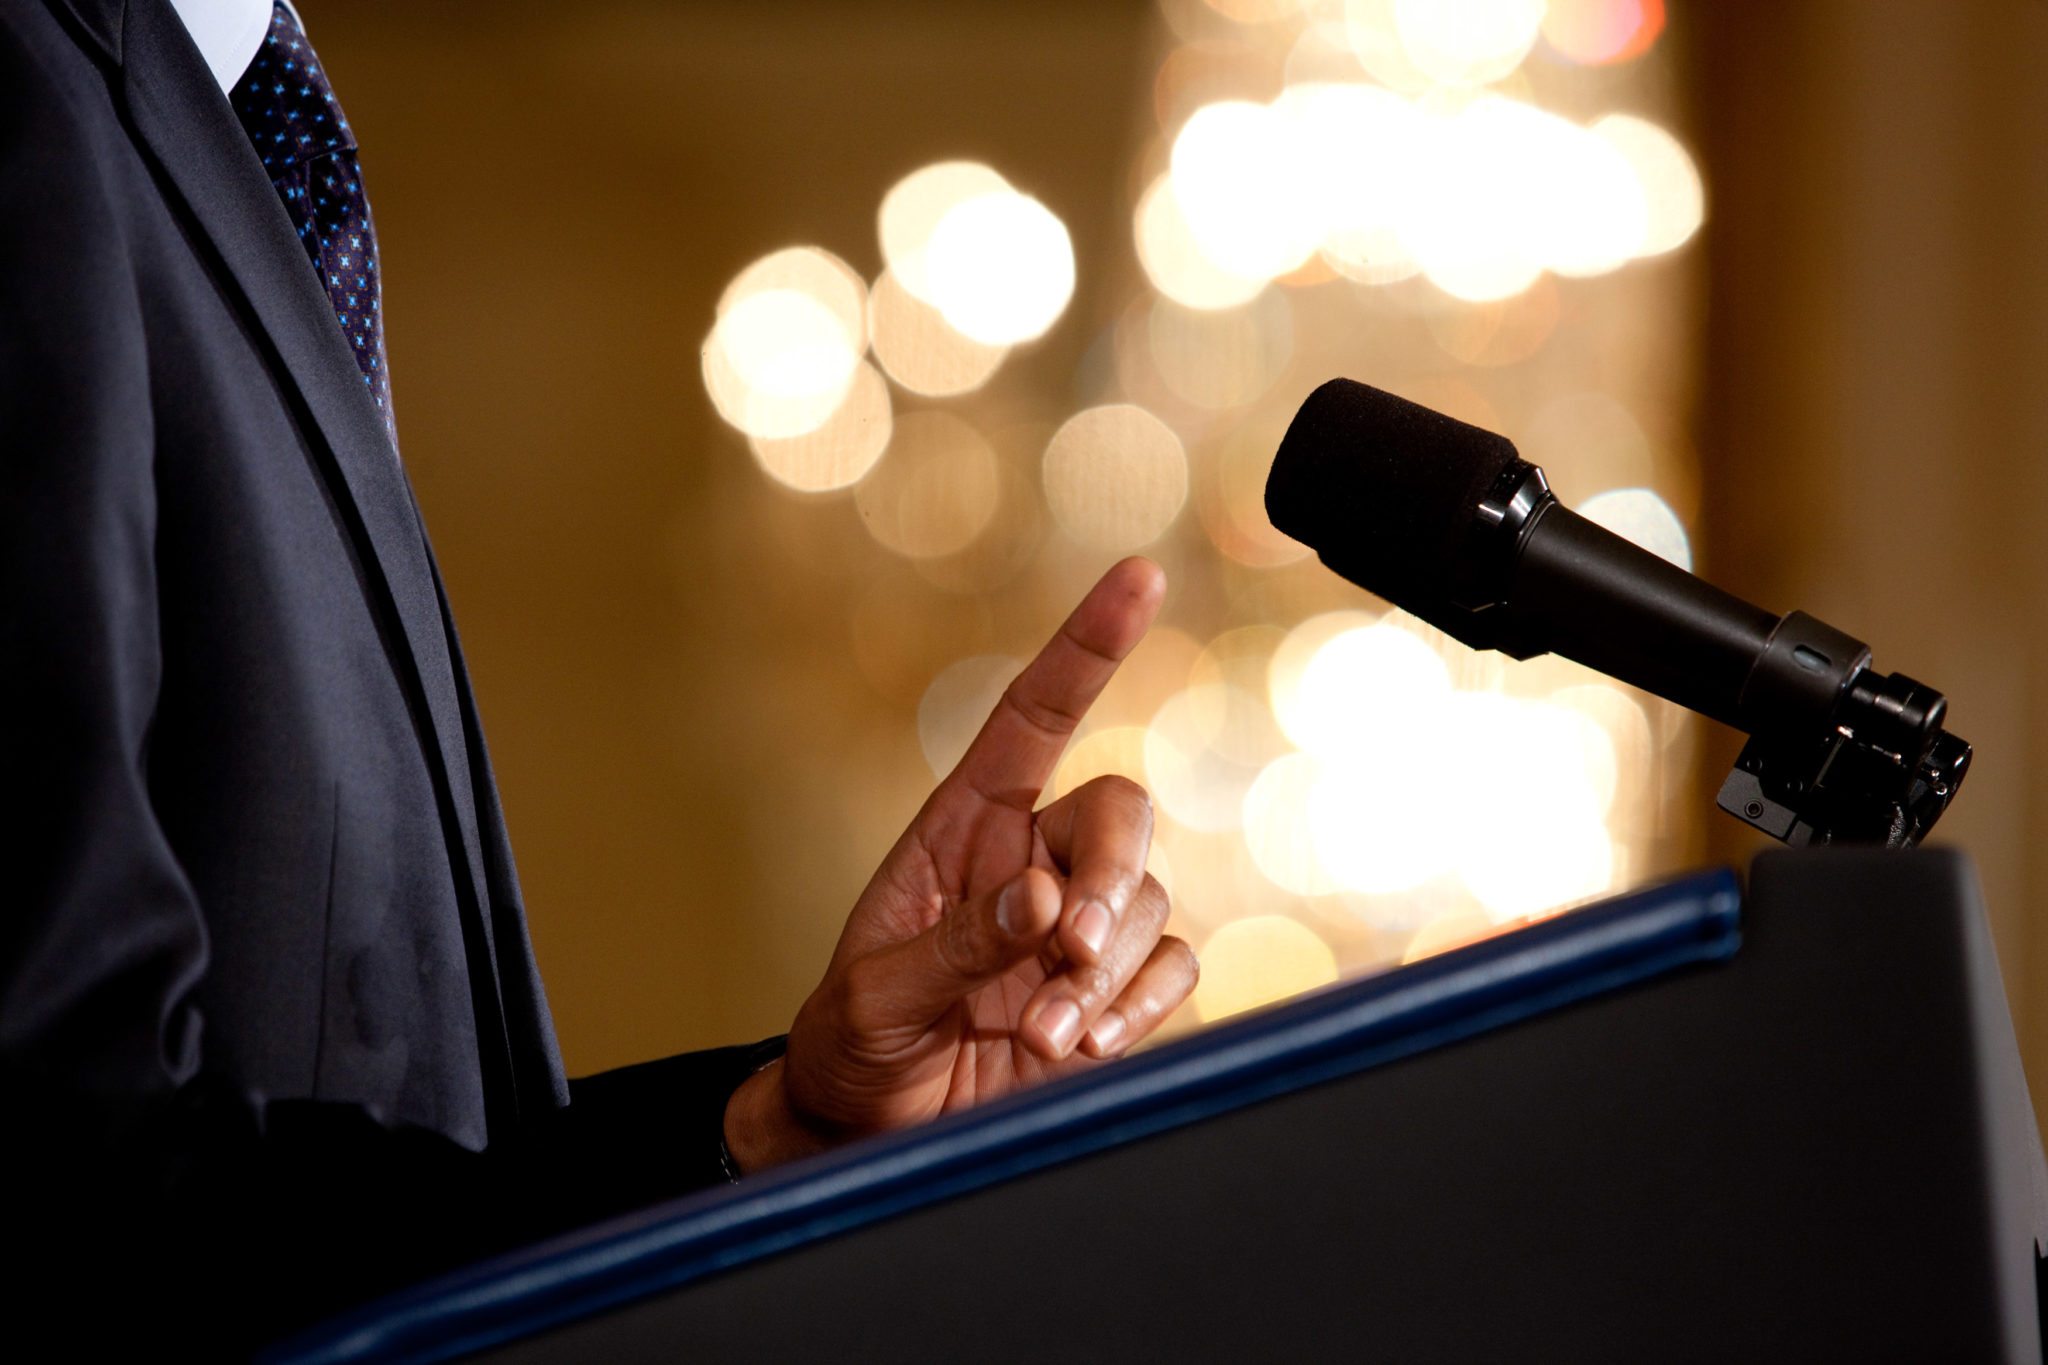 0519-0908-0820-3533_close_up_of_a_man_making_a_point_during_a_speech_microphone_and_podium_in_view_o